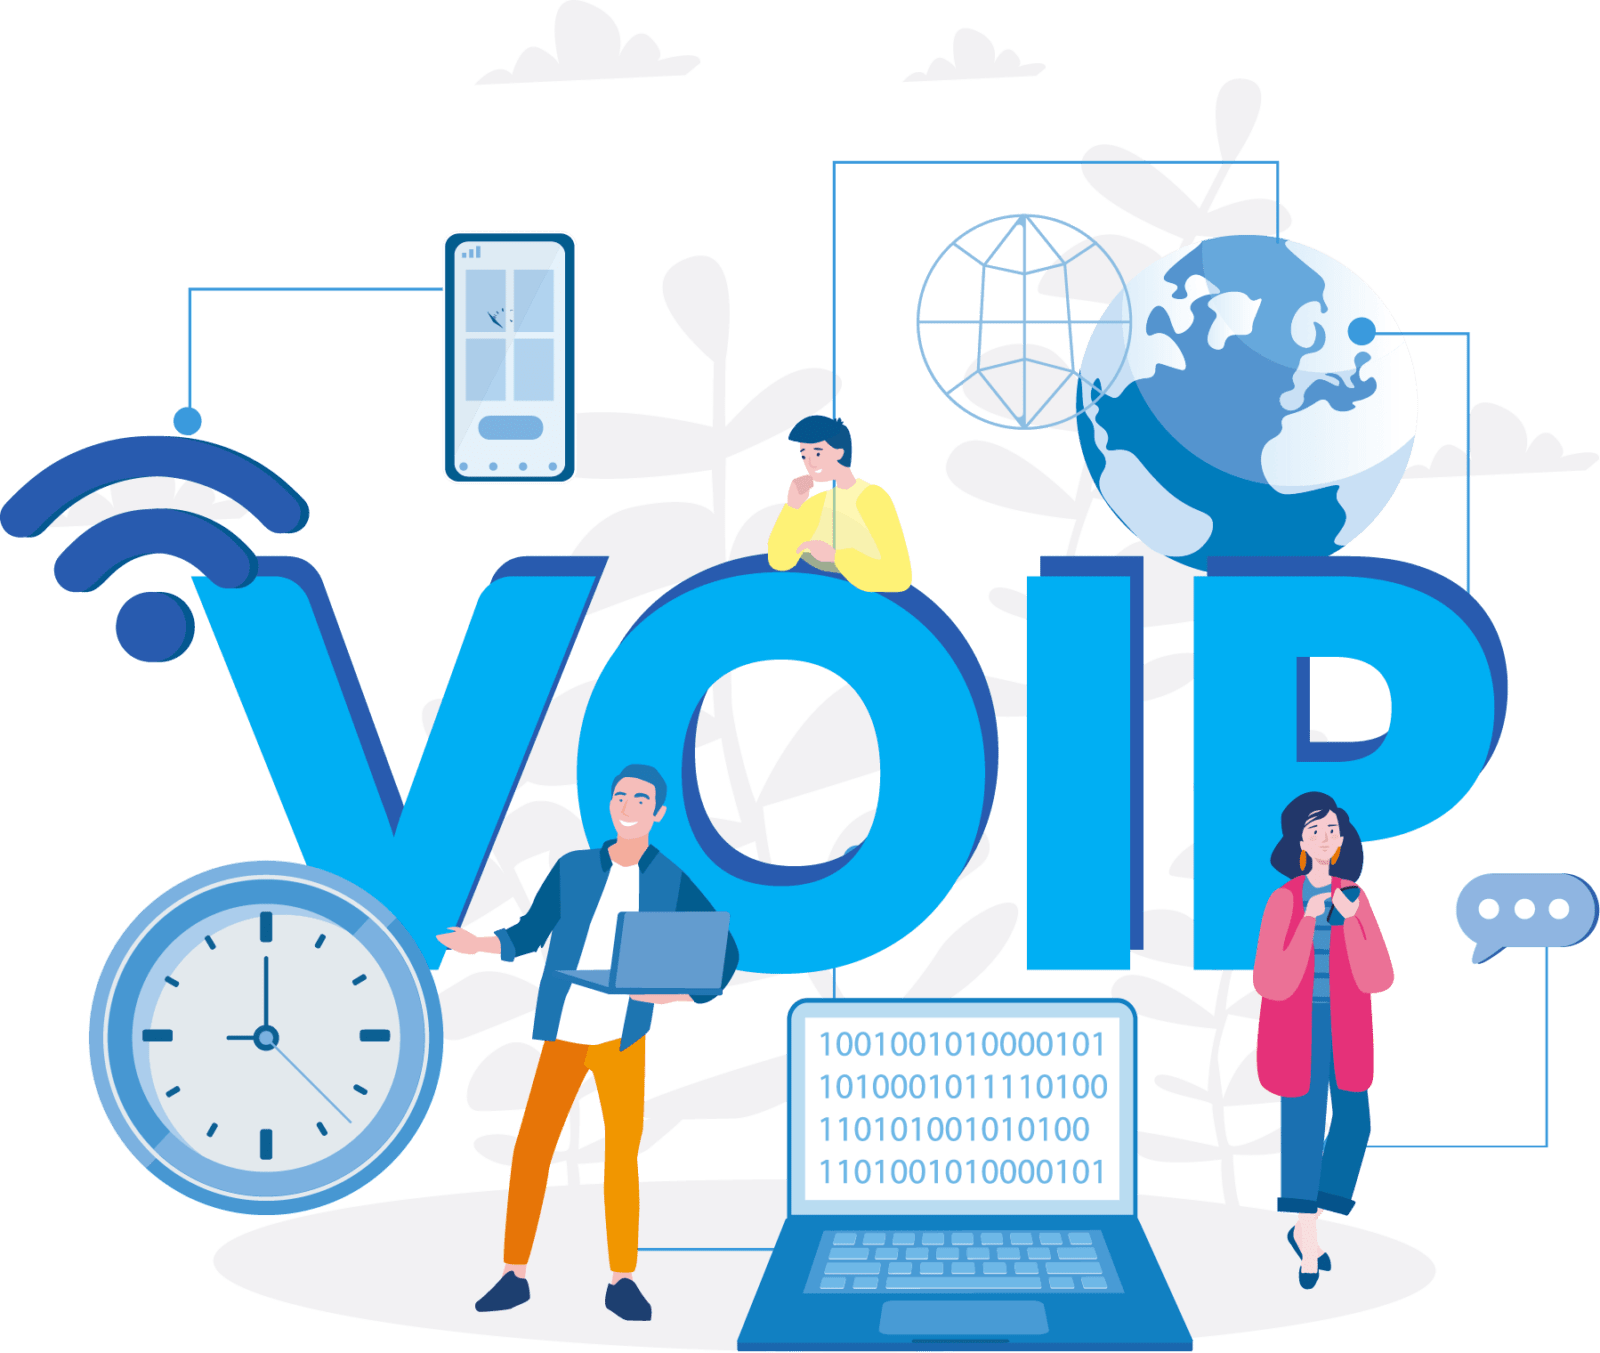 VoIP provider for Businesses